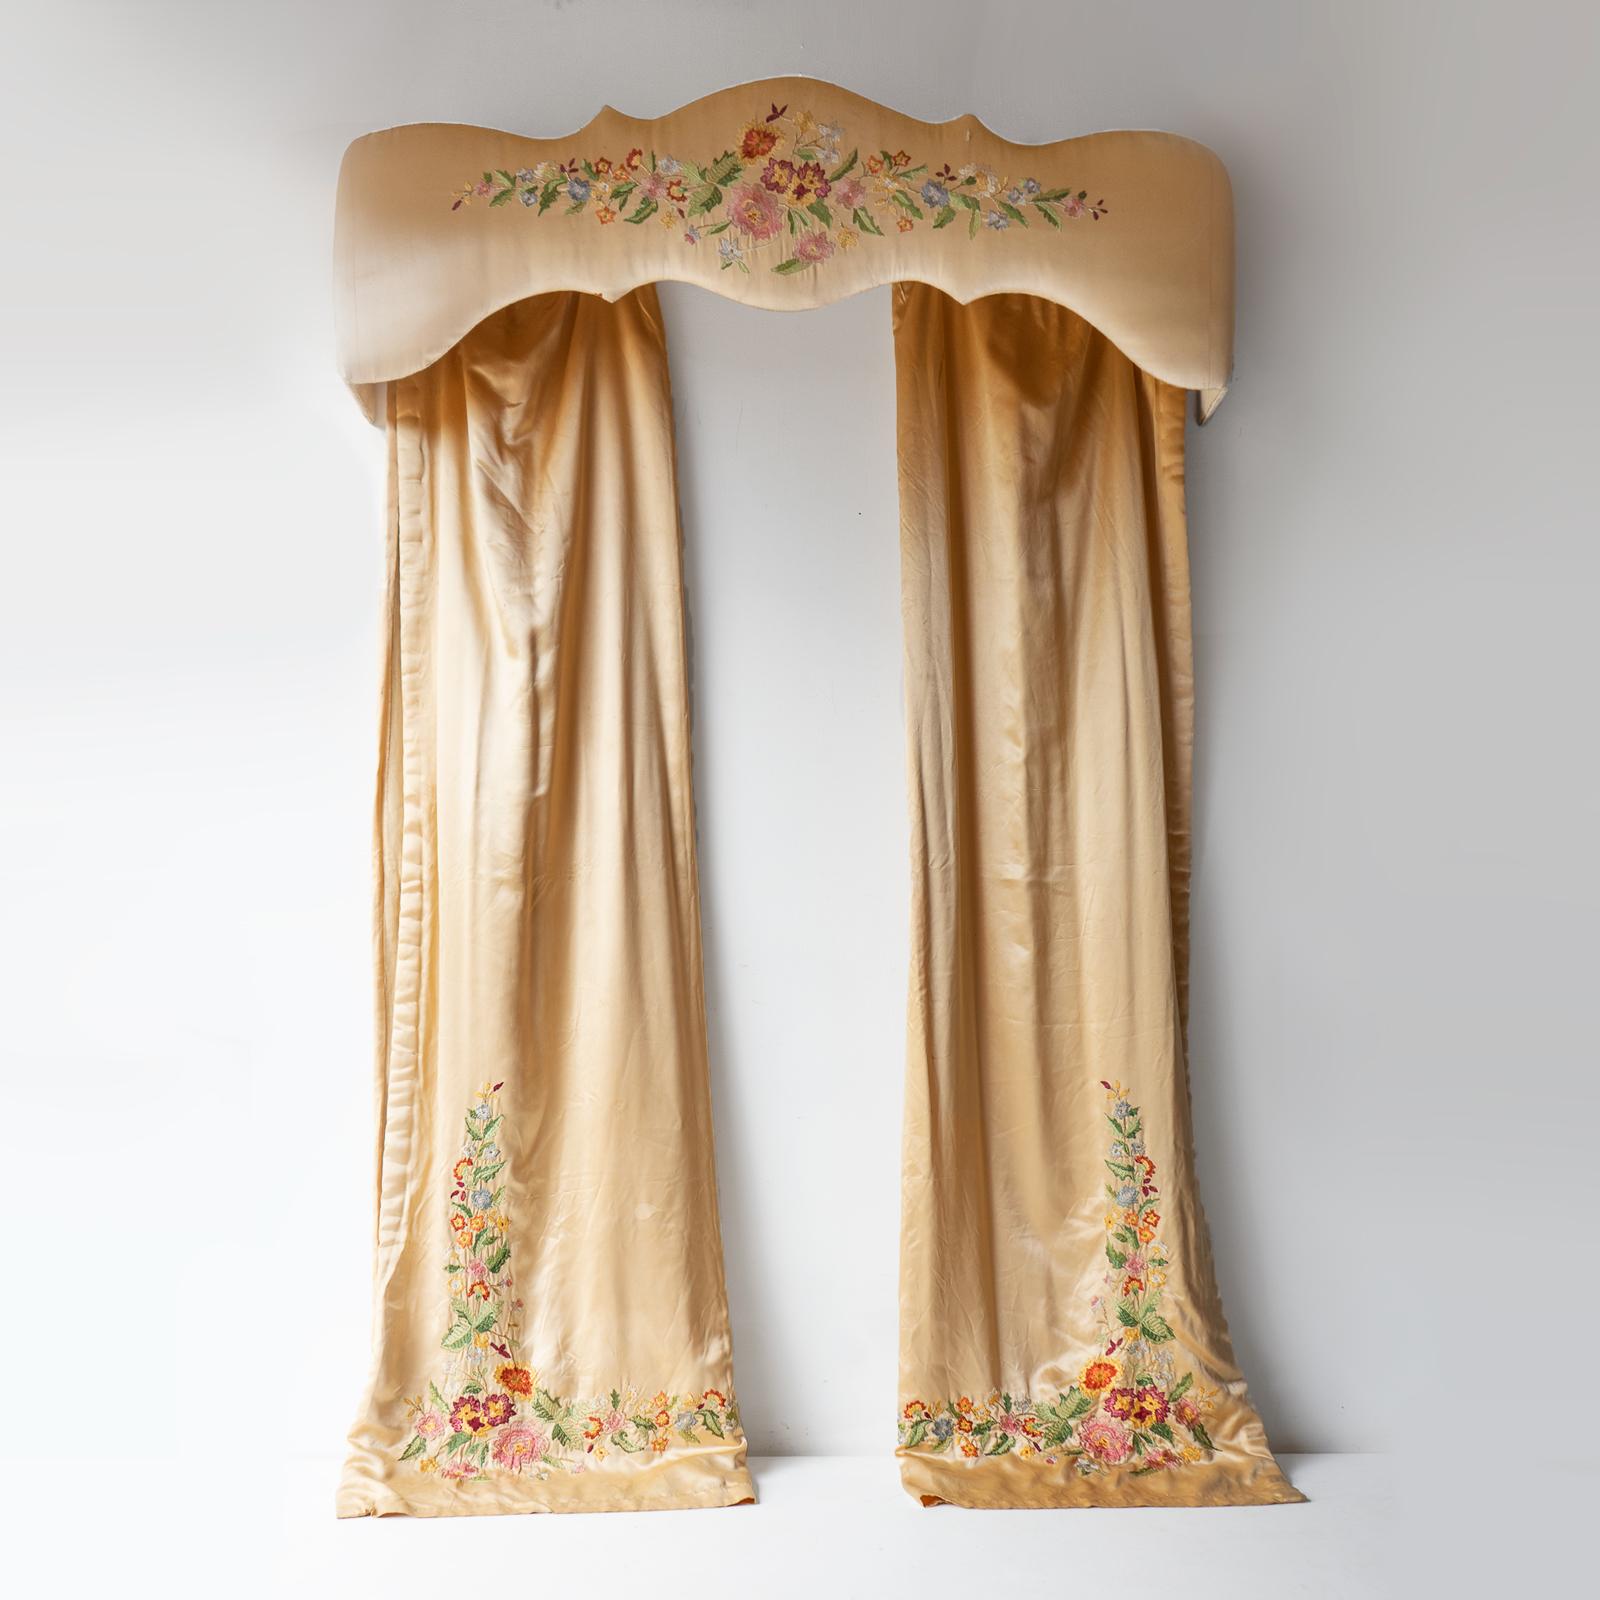 VINTAGE CURTAINS
A pair of luxurious peach-coloured silk satin curtains with embroidered floral motifs with a matching decoratively shaped pelmet.

Fully lined.

They are in good vintage condition overall, there is an odd mark/area of wear here and